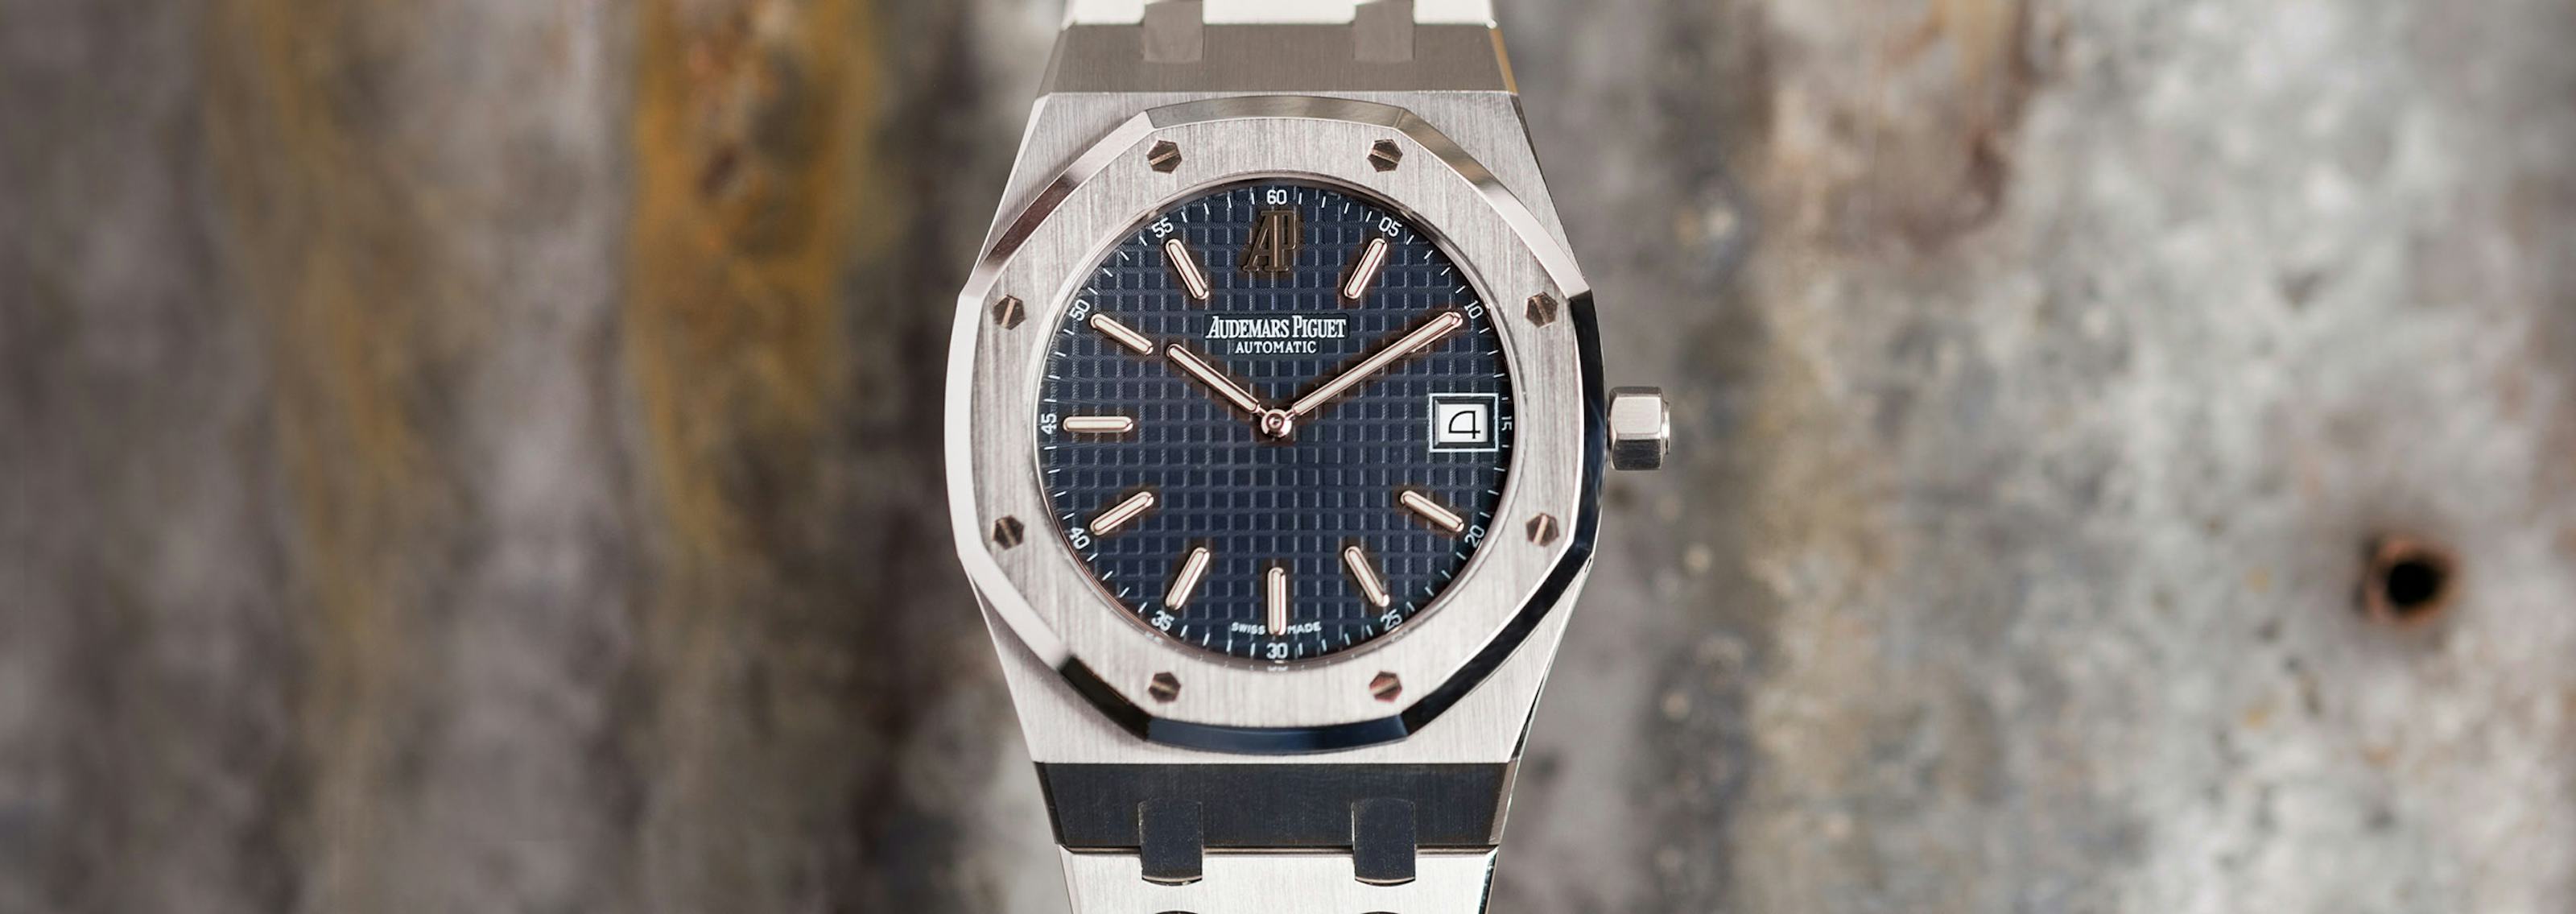 History of Audemars Piguet: 1875 to Present Day